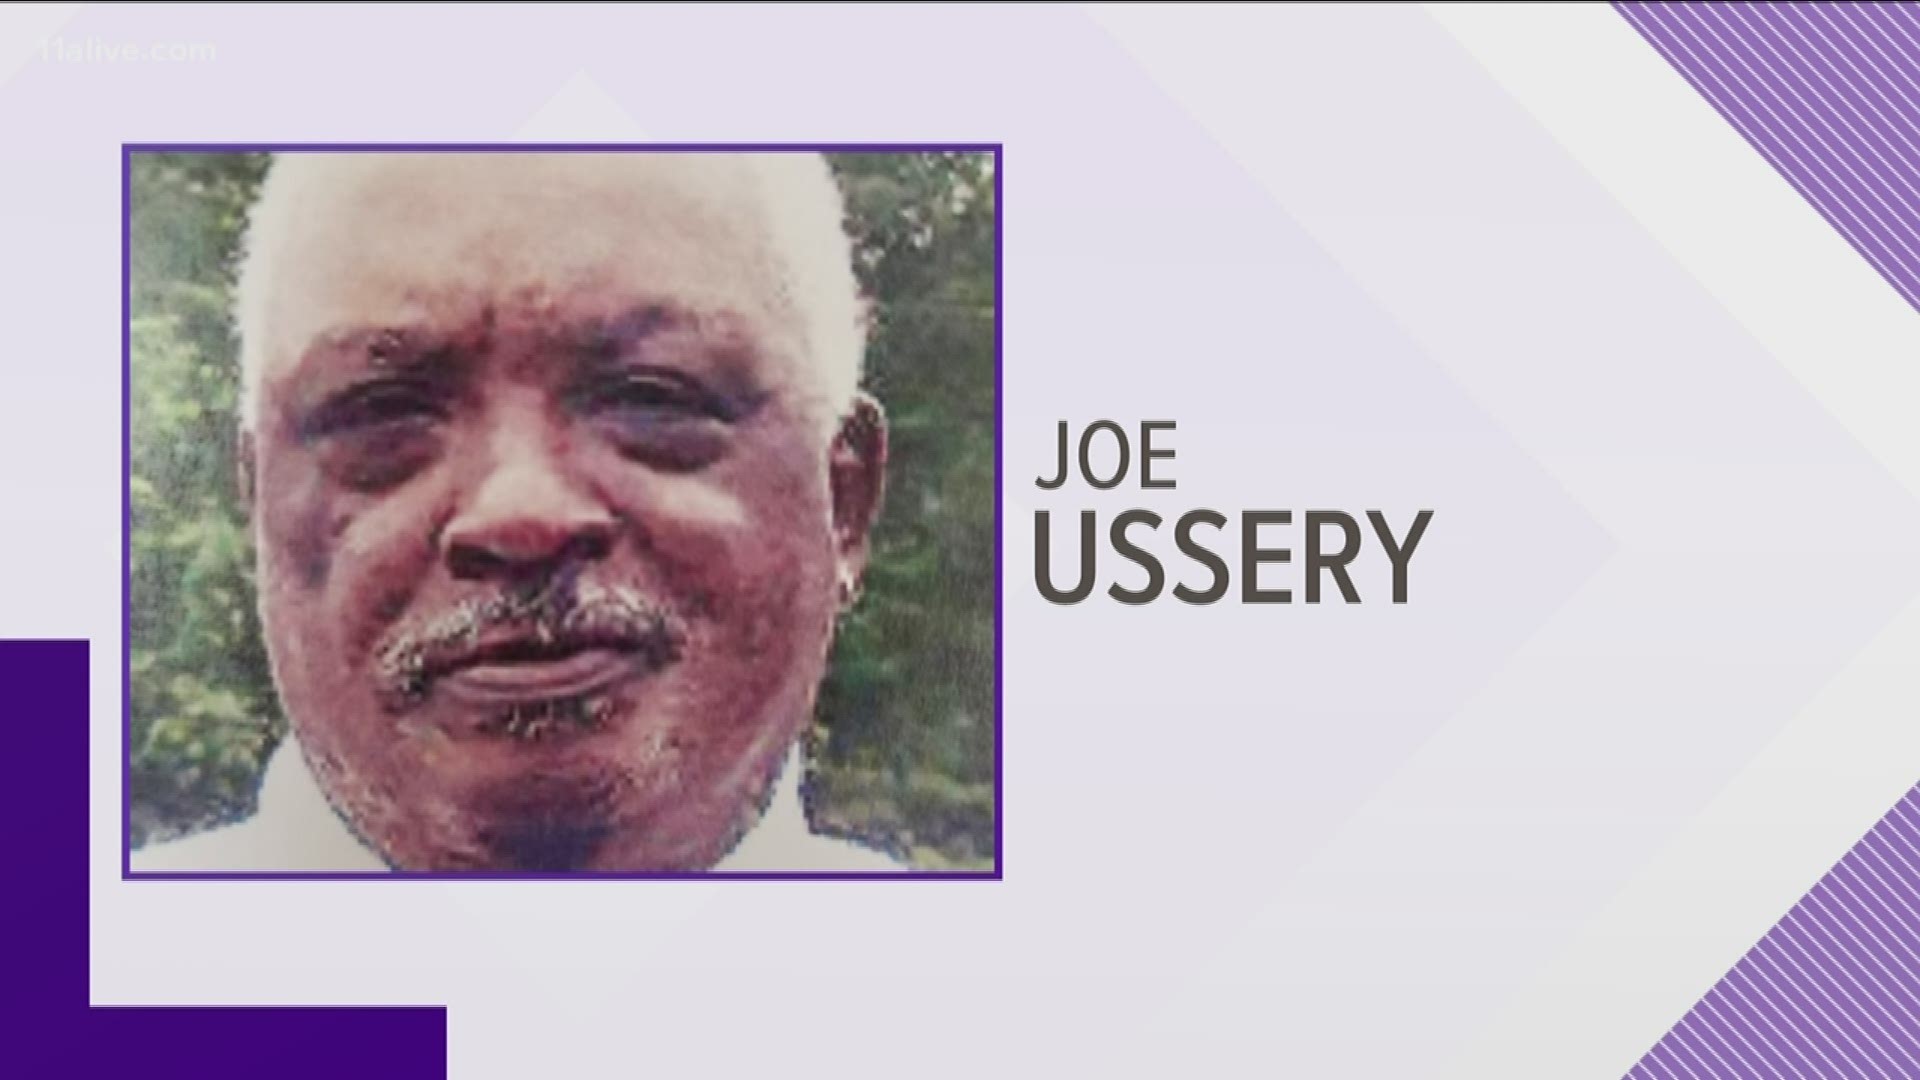 Joe Ussery was reported missing in 2016.